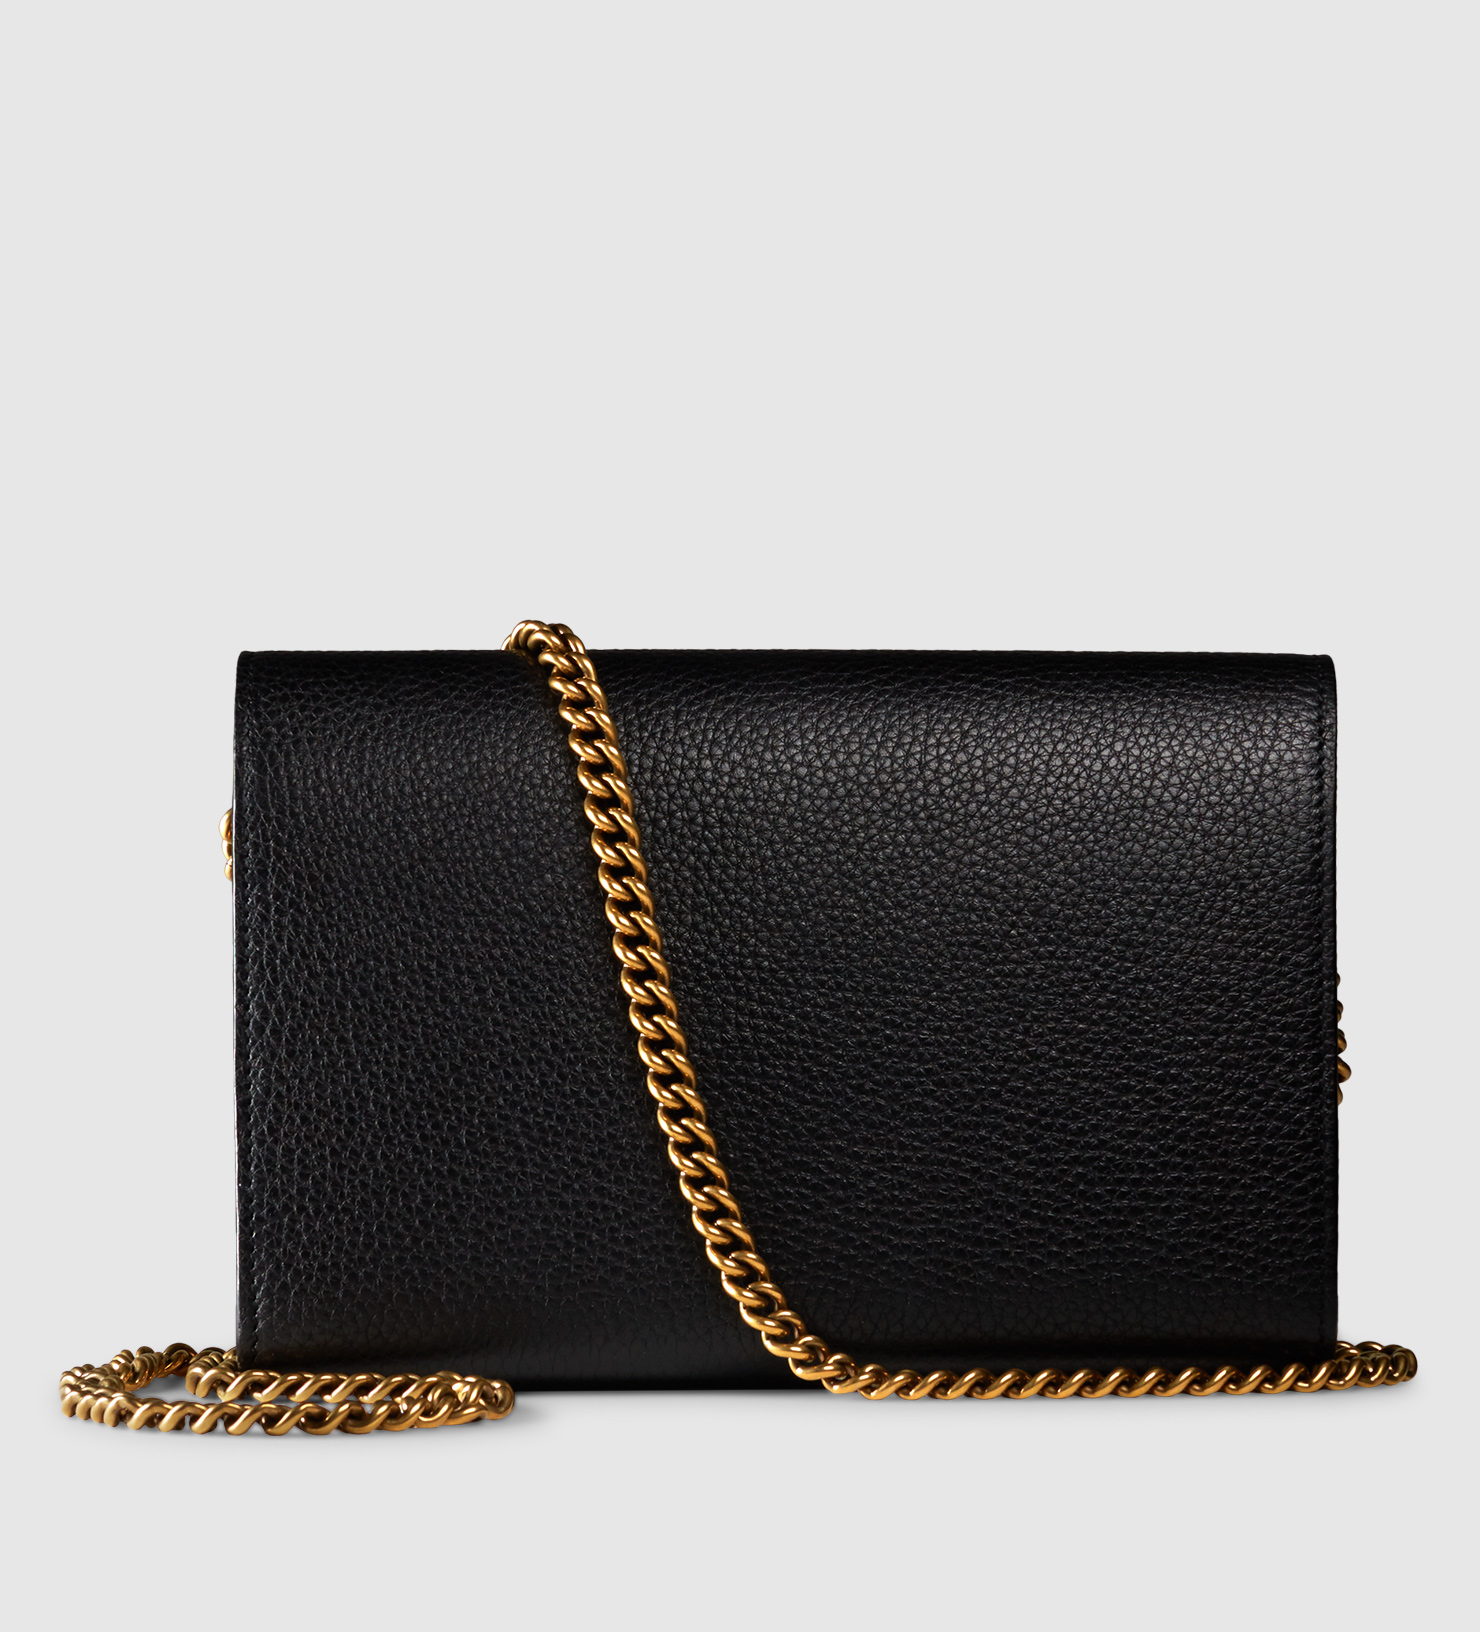 Lyst - Gucci Gg Marmont Leather Chain Wallet in Black